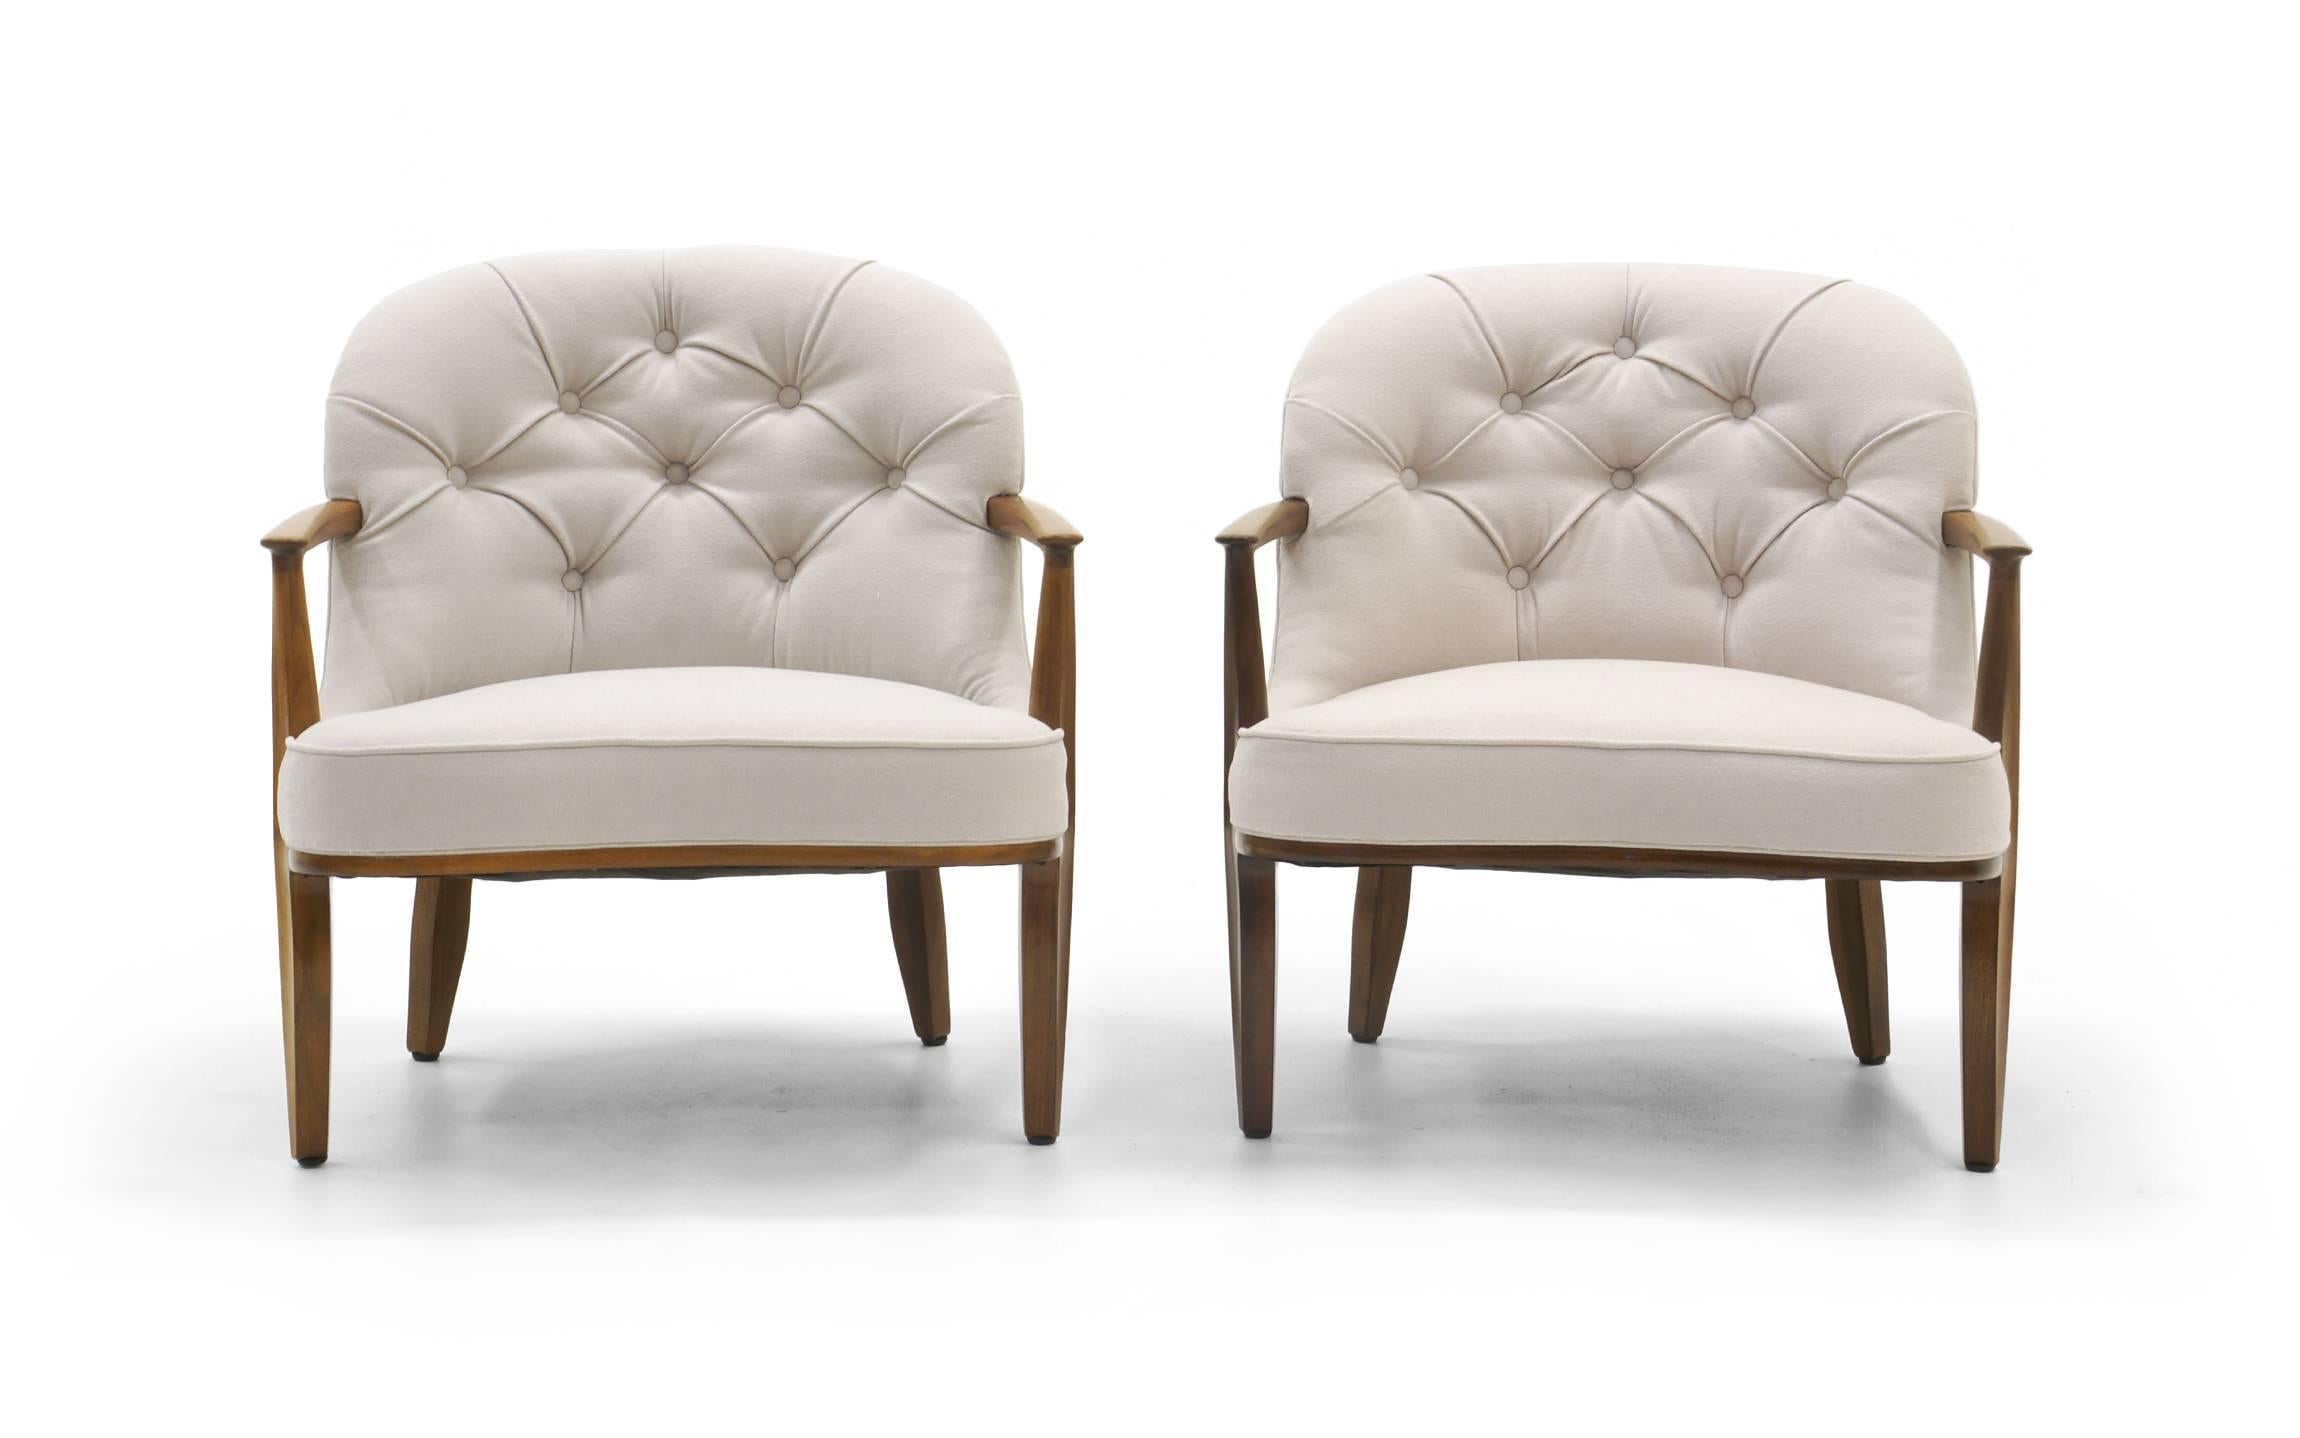 Pair of lounge chairs designed by Edward Wormley, Janus collection, for Dunbar. Reupholstered in a light greige (grey / beige) Maharam wool blend fabric. Very soft to the touch. The mahogany frames retain their original finish with beautiful patina.